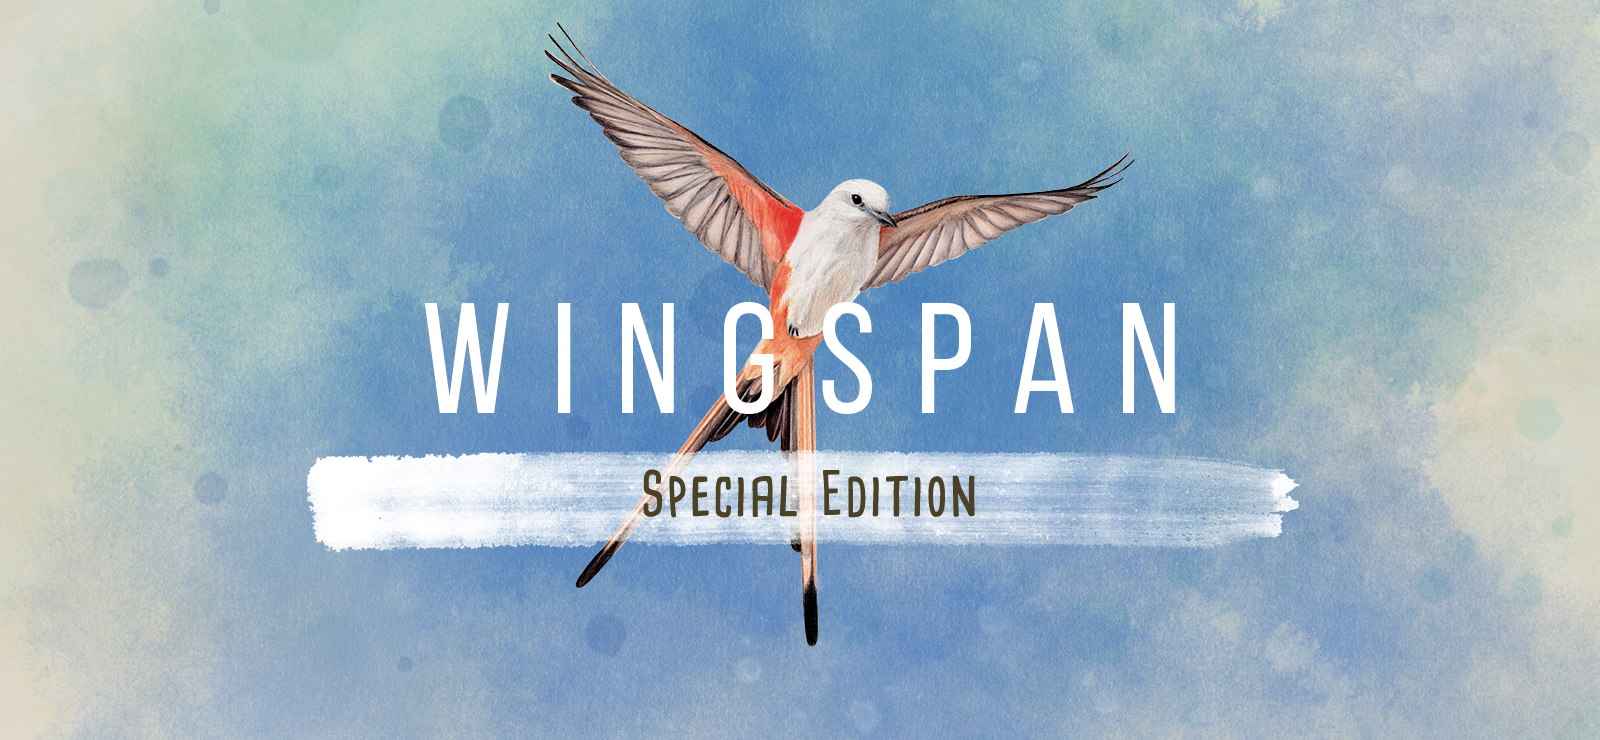 Wingspan Special Edition